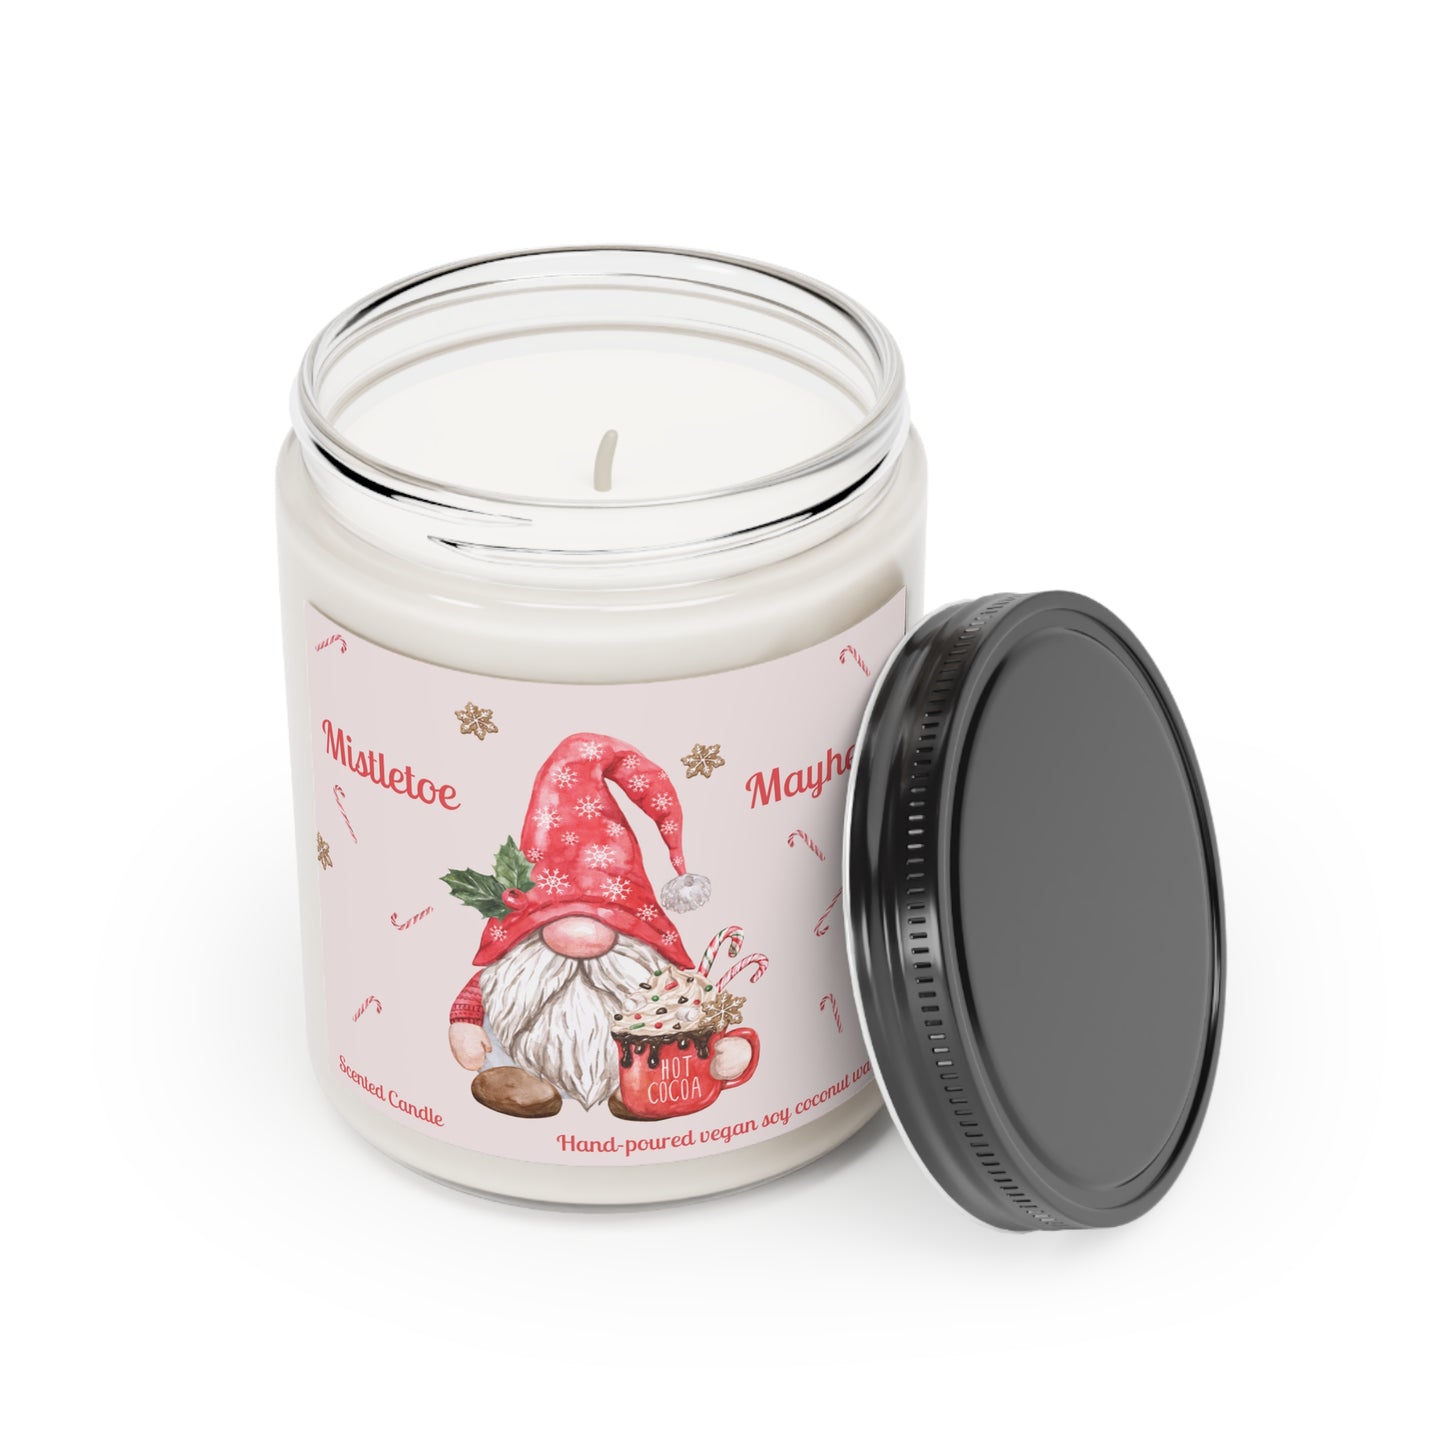 Holiday Scented Candle, Aromatherapy Candles, All-Natural Soy Coconut Wax and Essential Oil Infused, Pet Safe, Vegan